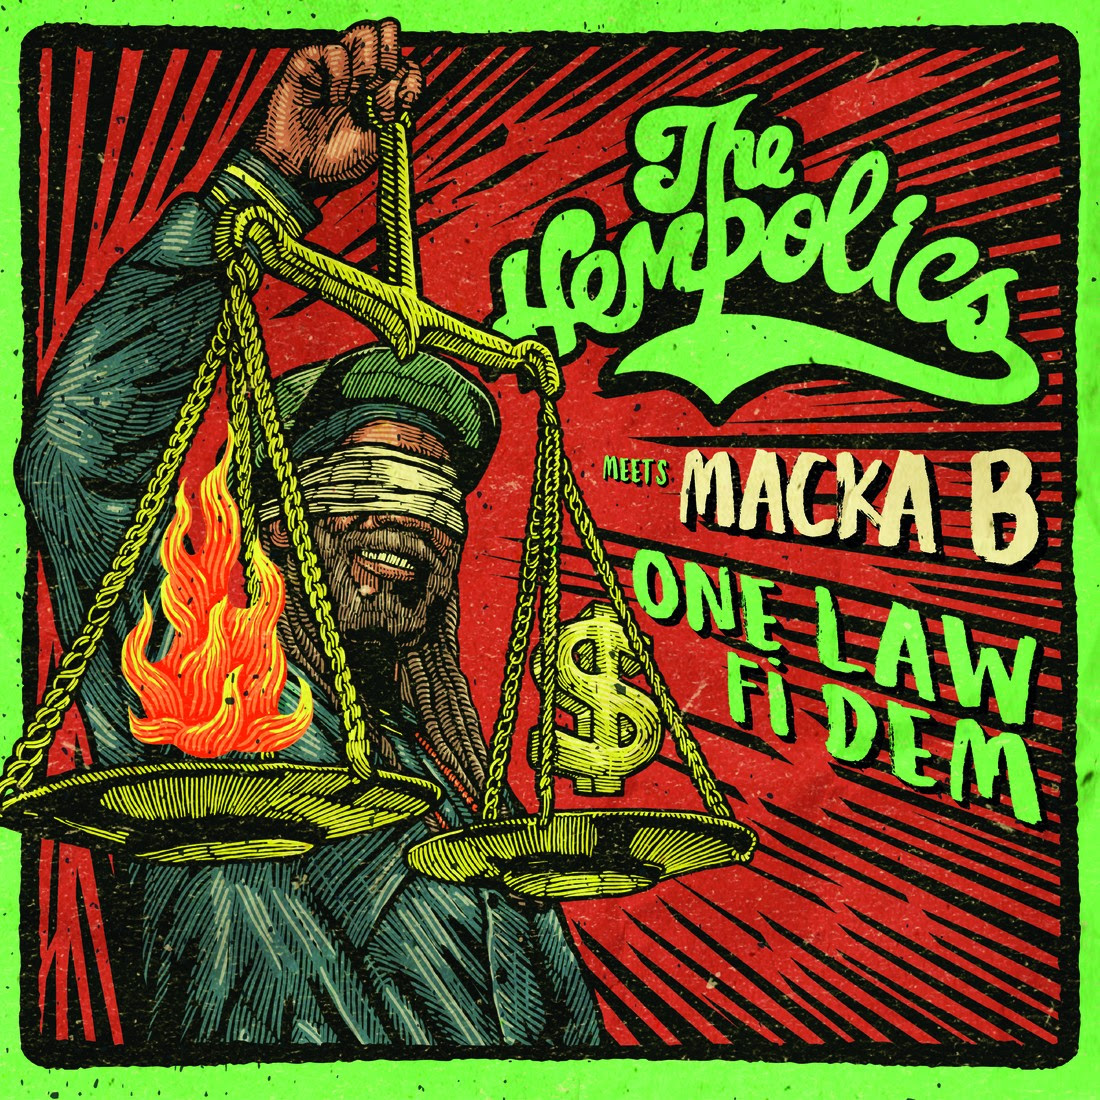 Macka B and the Hempolics holding the scales of justice trying to balance fire and money